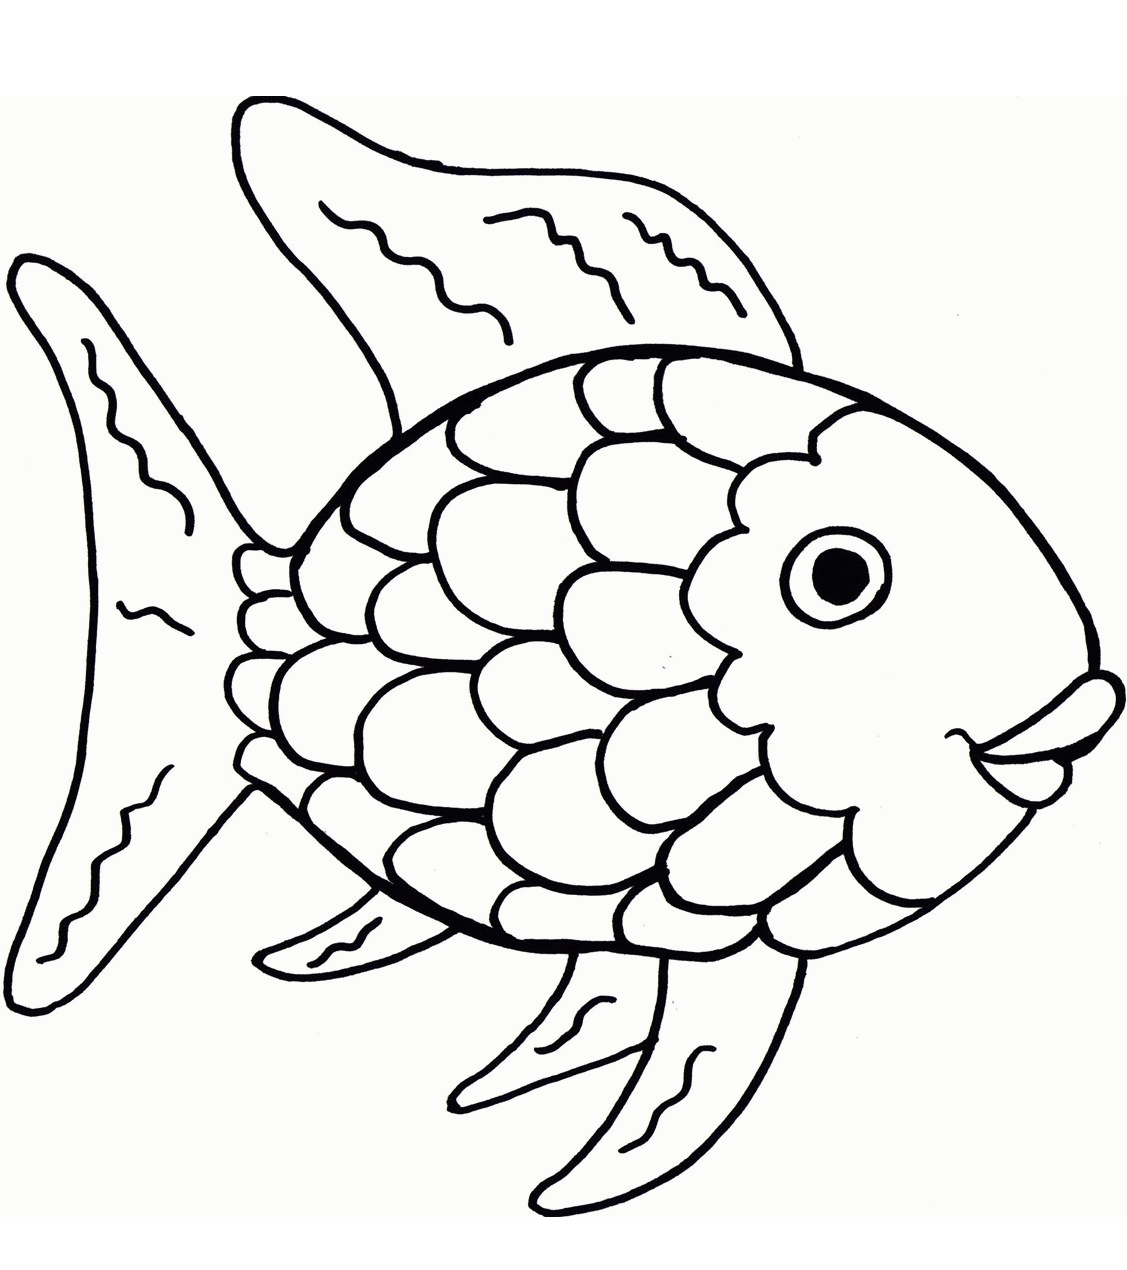 The Rainbow Fish Coloring Page - Free Printable Coloring ...